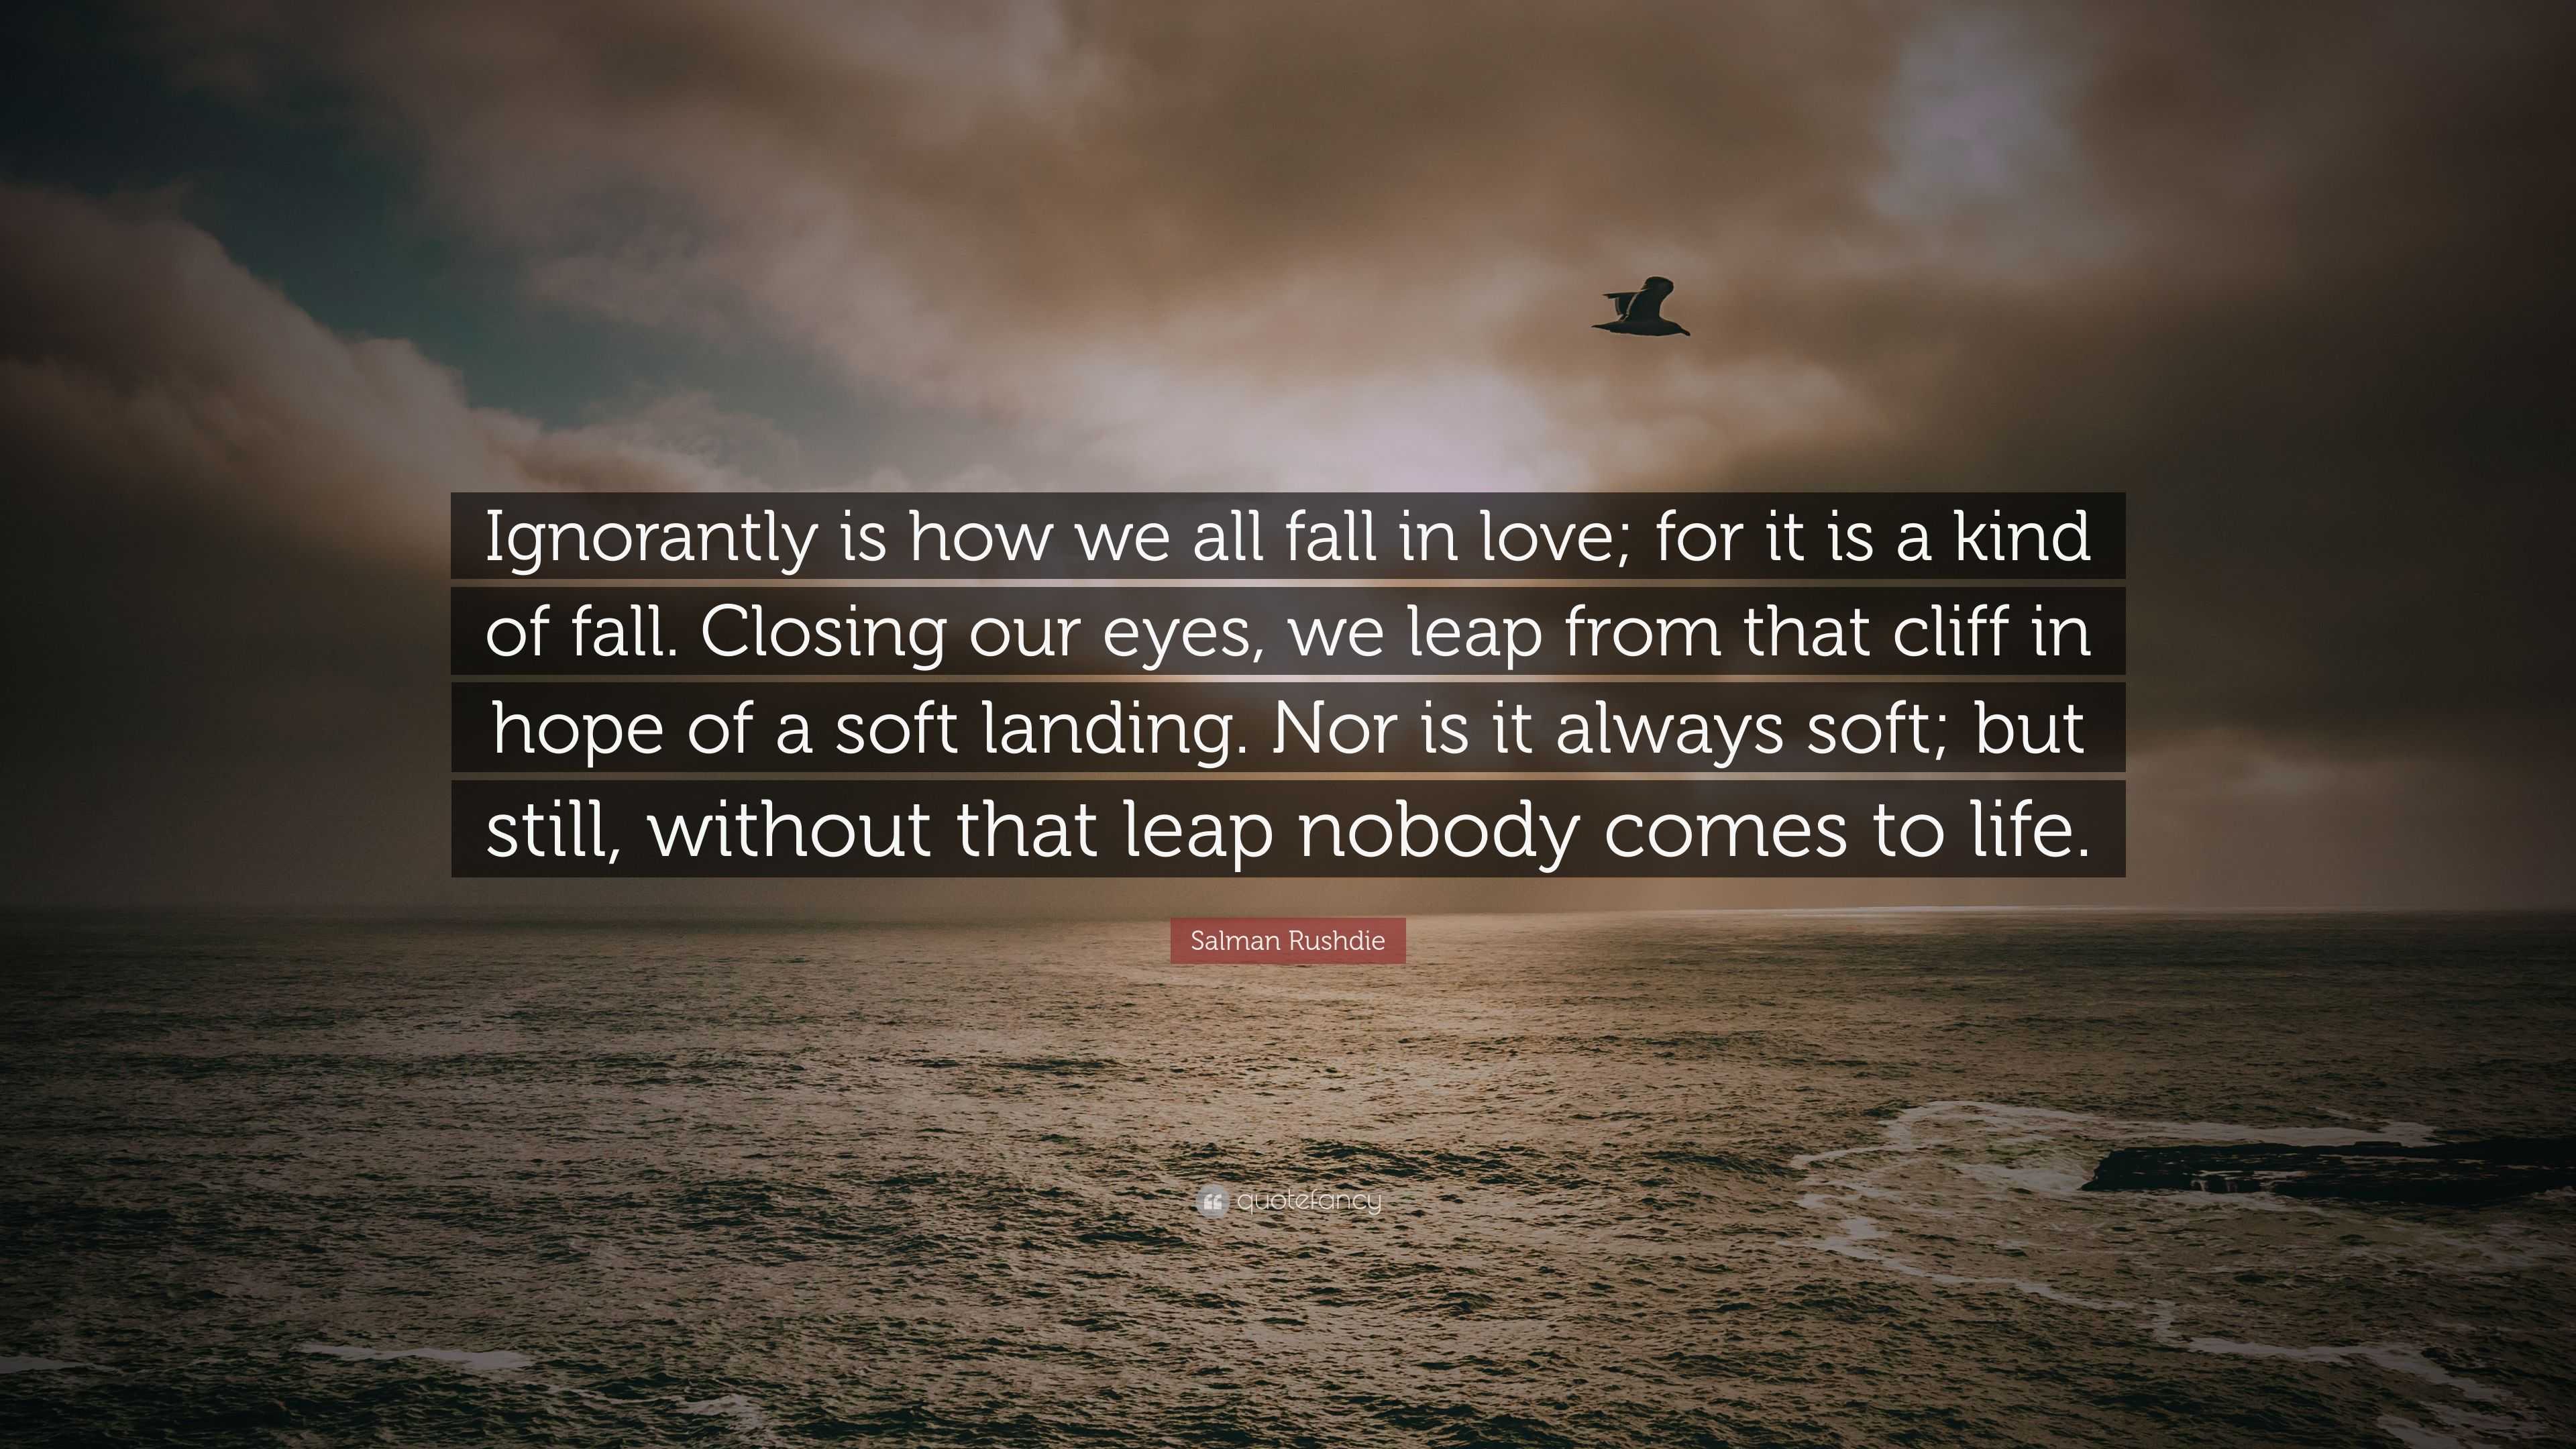 Salman Rush Quote “Ignorantly is how we all fall in love for it